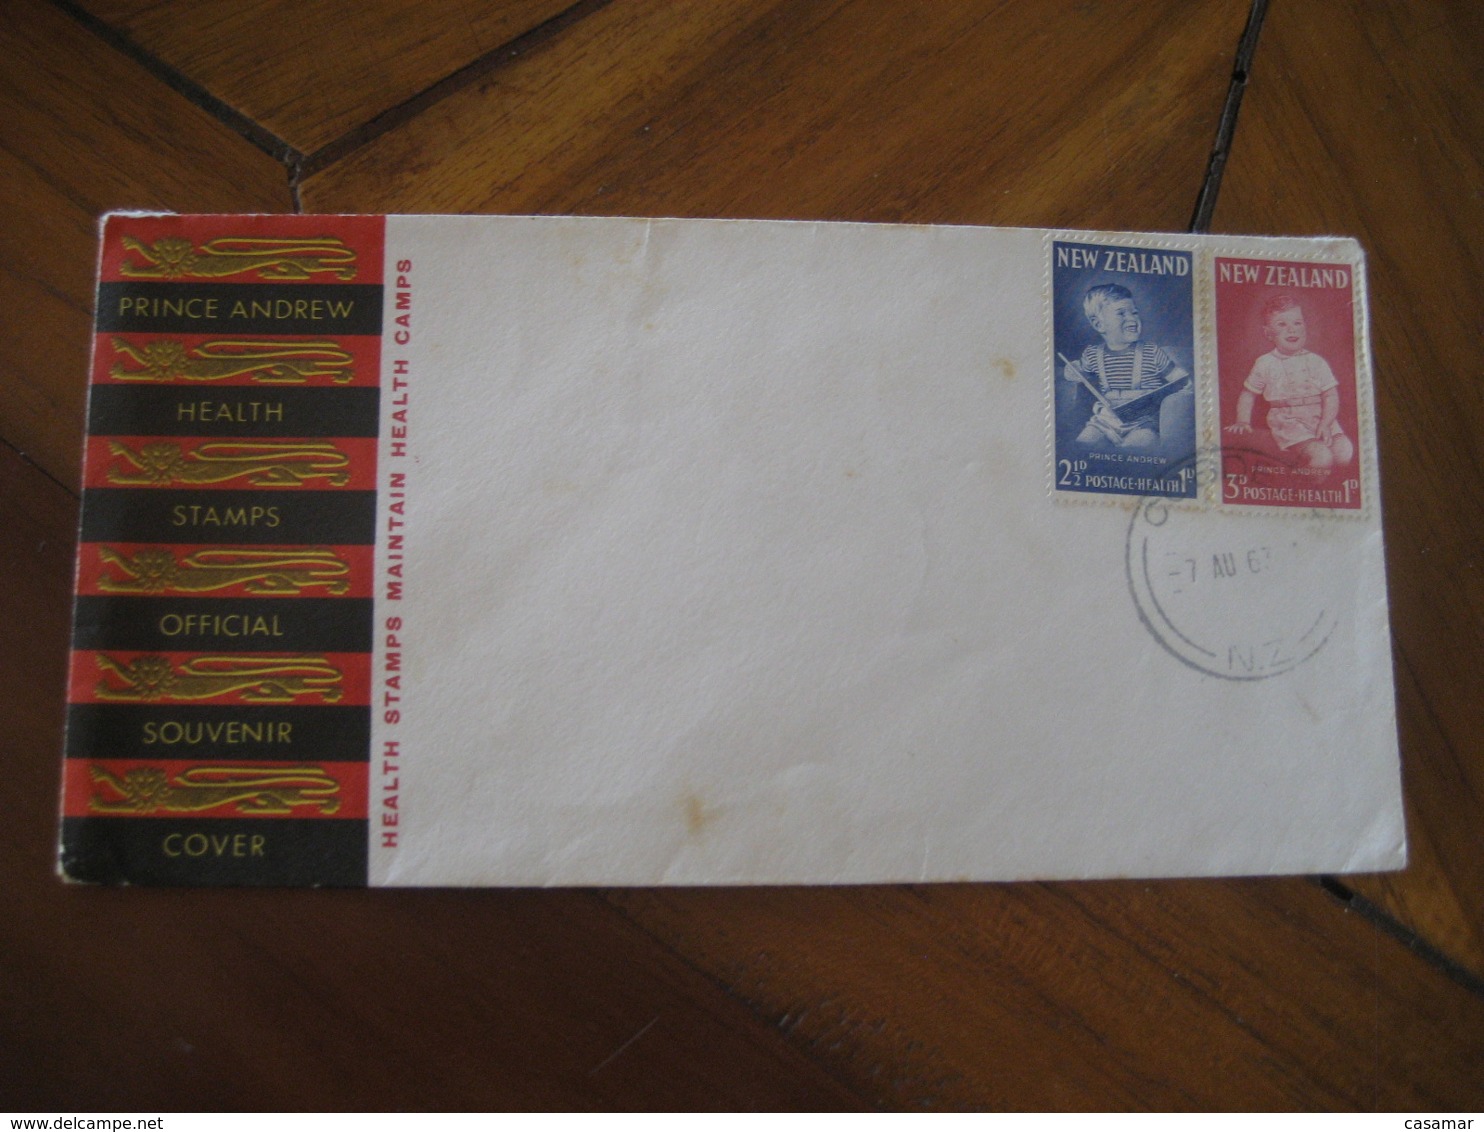 Prince Andrew 1963 Health Stamps Official Souvenir Cancel Cover NEW ZEALAND - Storia Postale